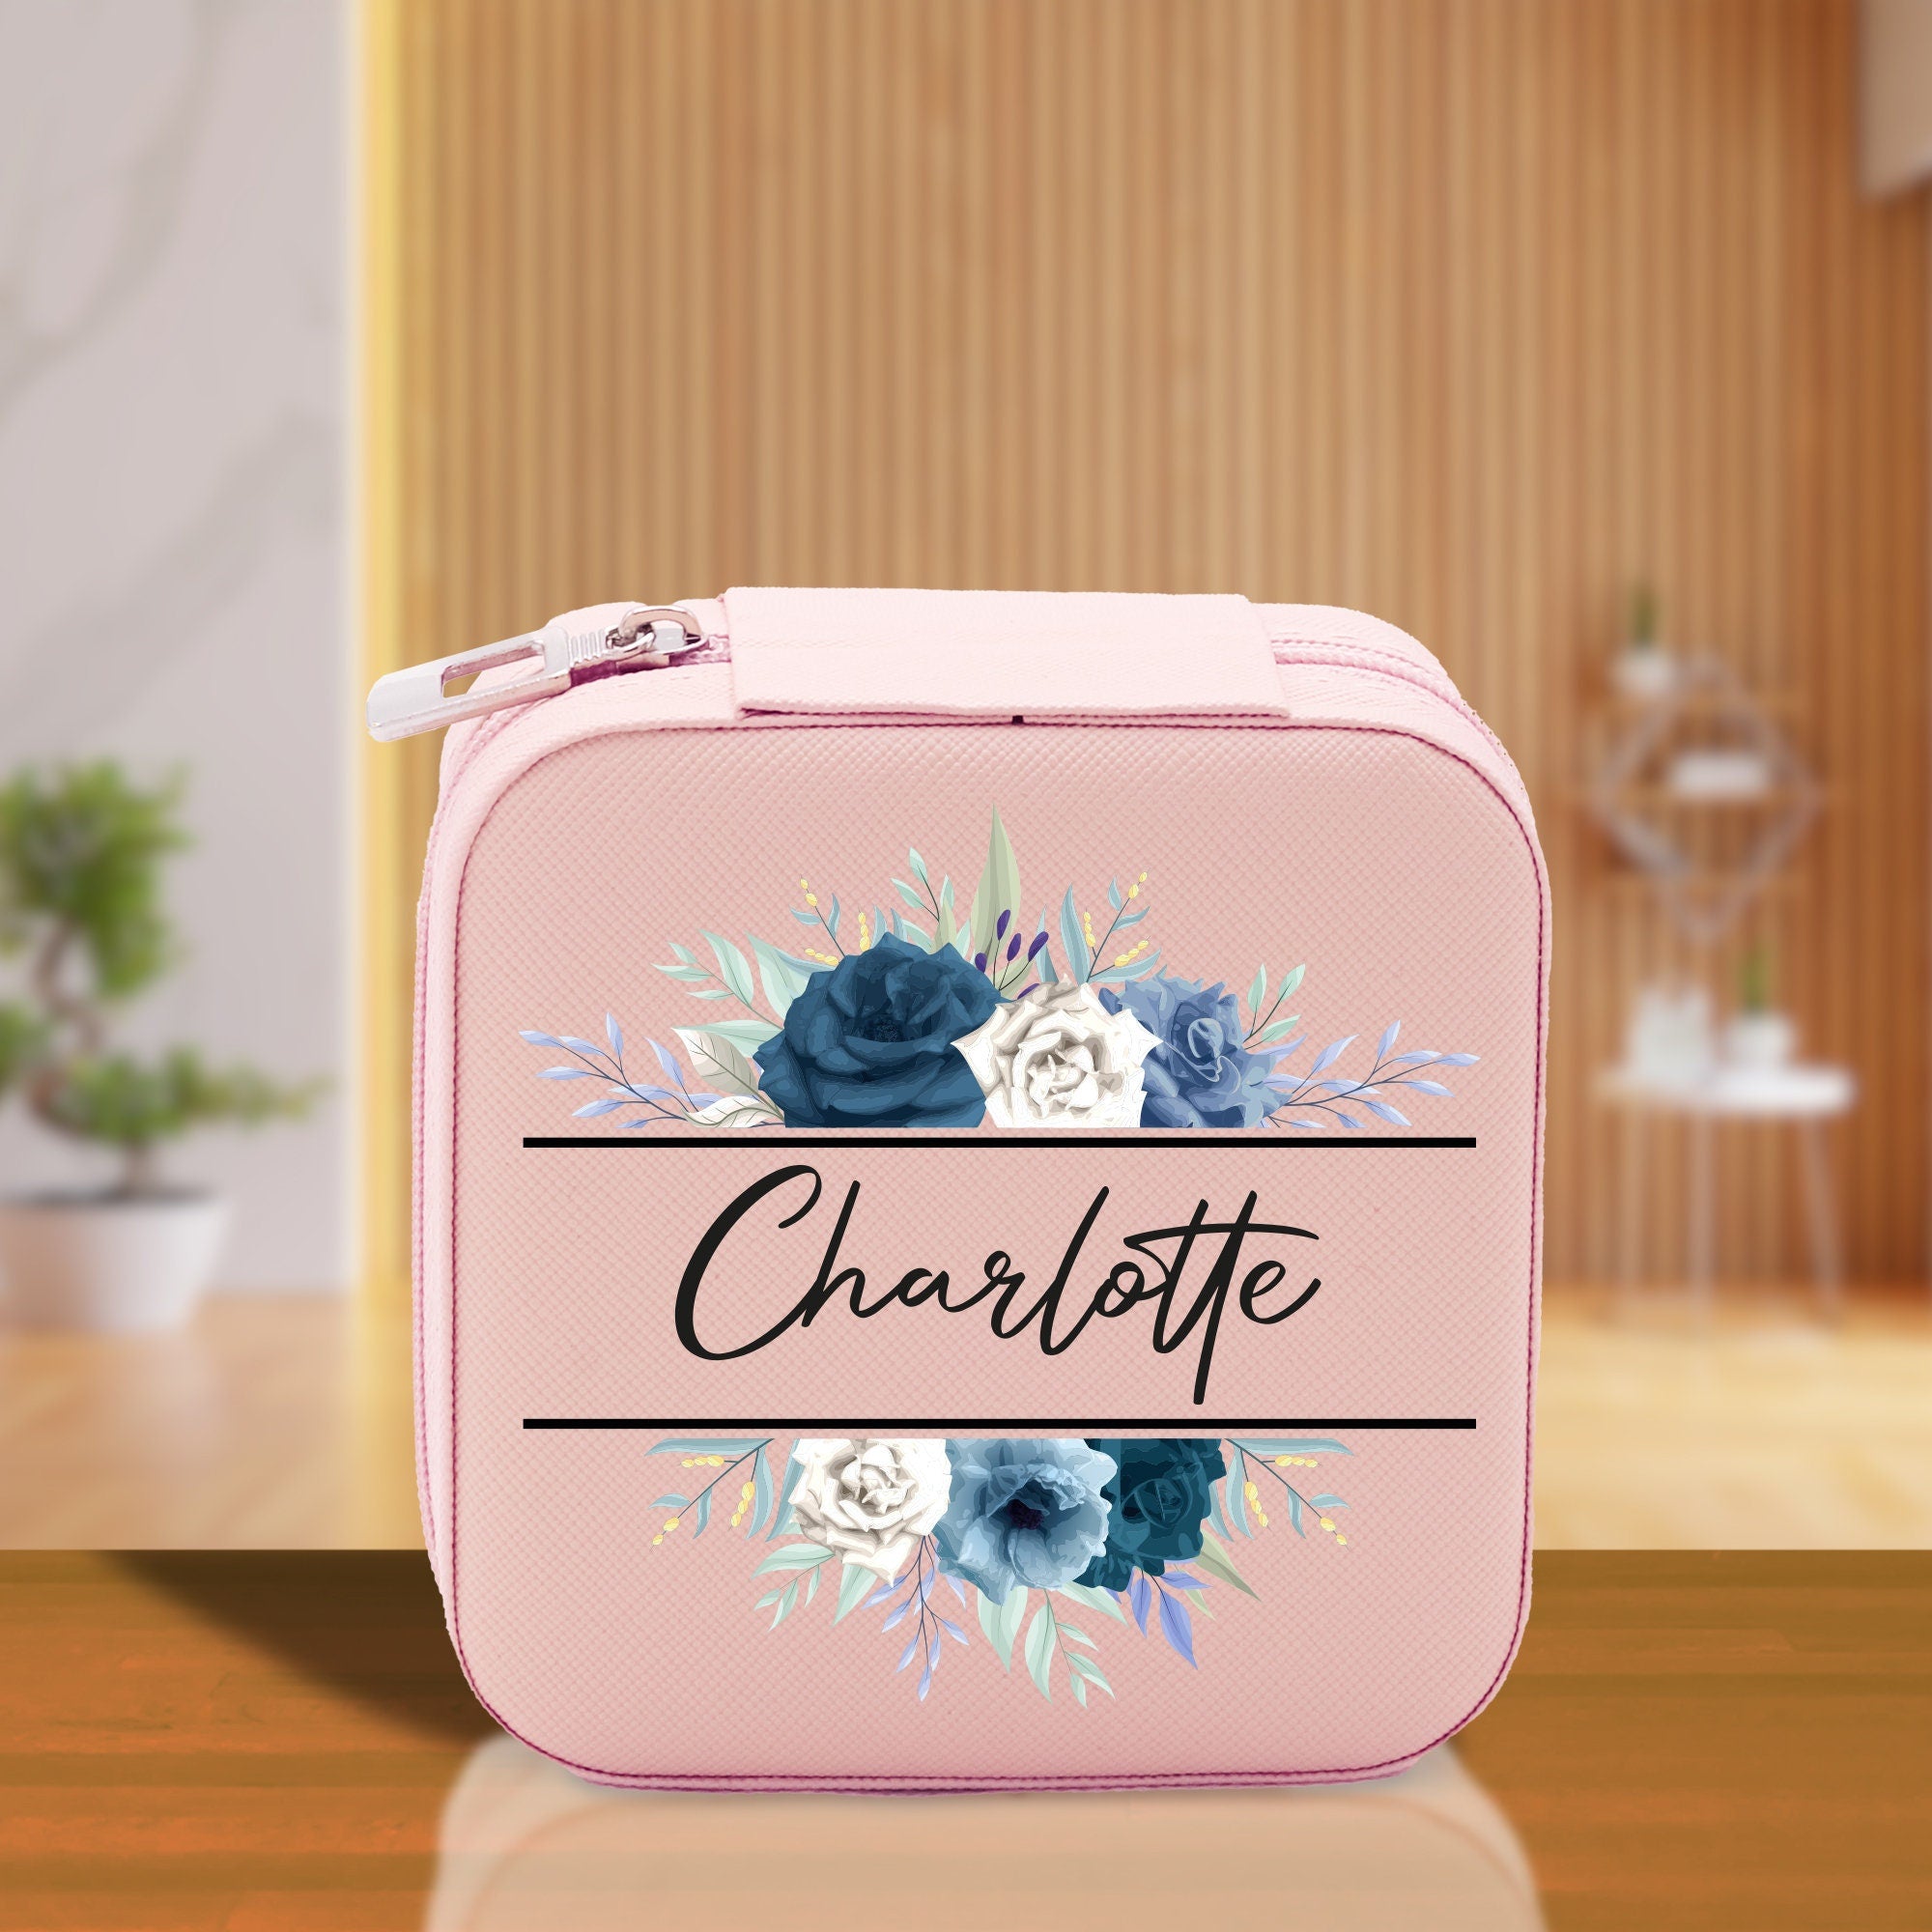 a pink lunch box with flowers on it